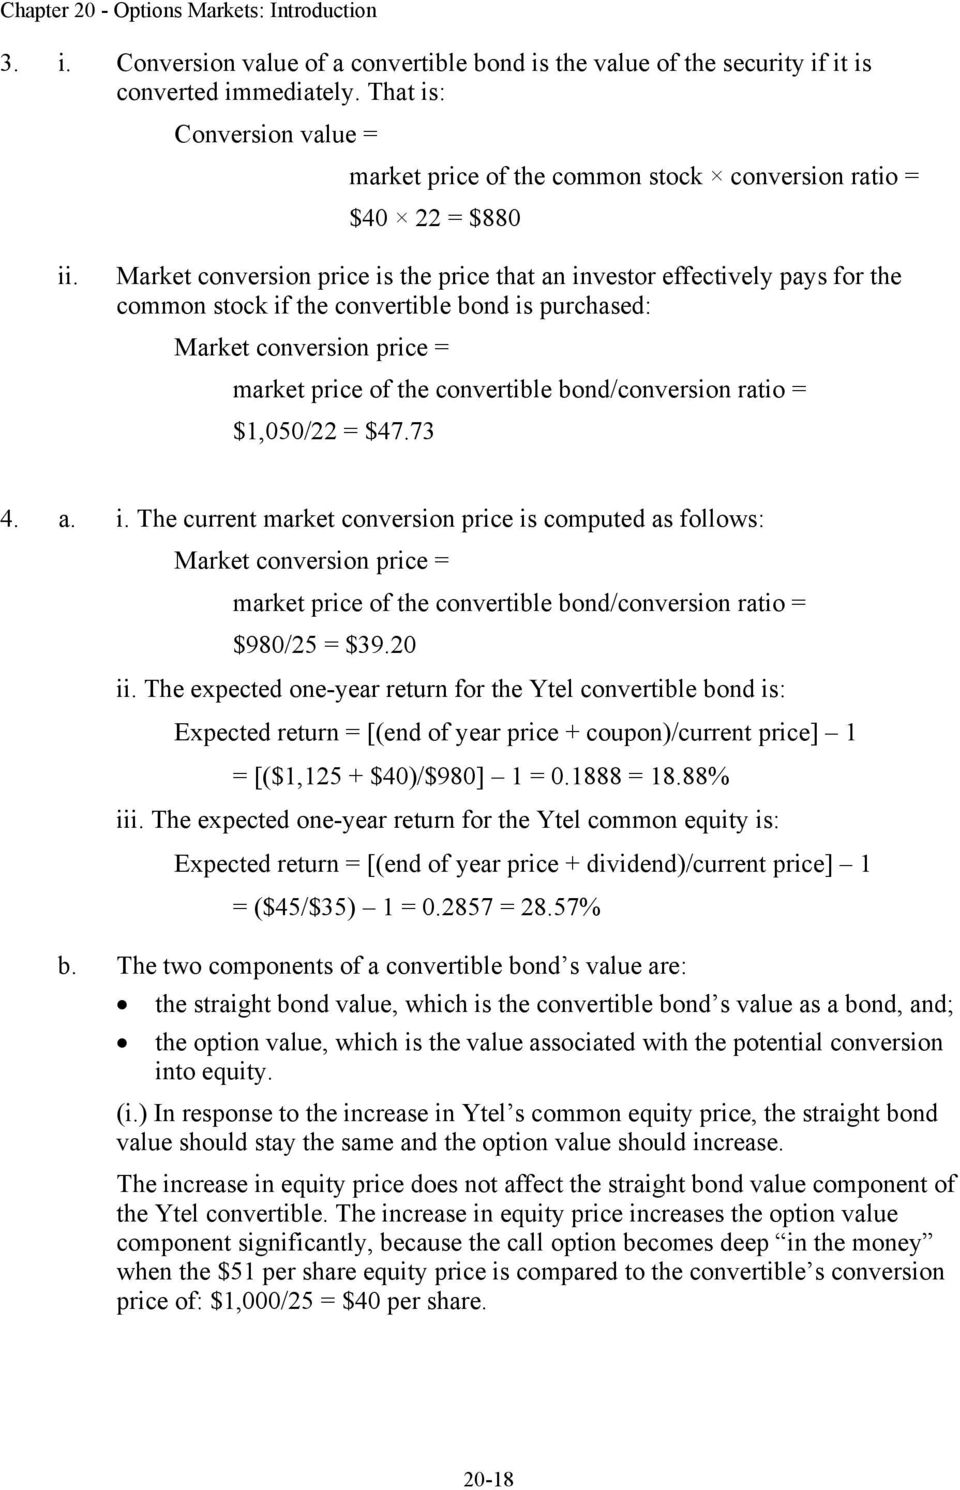 Market conversion price is the price that an investor effectively pays for the common stock if the convertible bond is purchased: Market conversion price = market price of the convertible